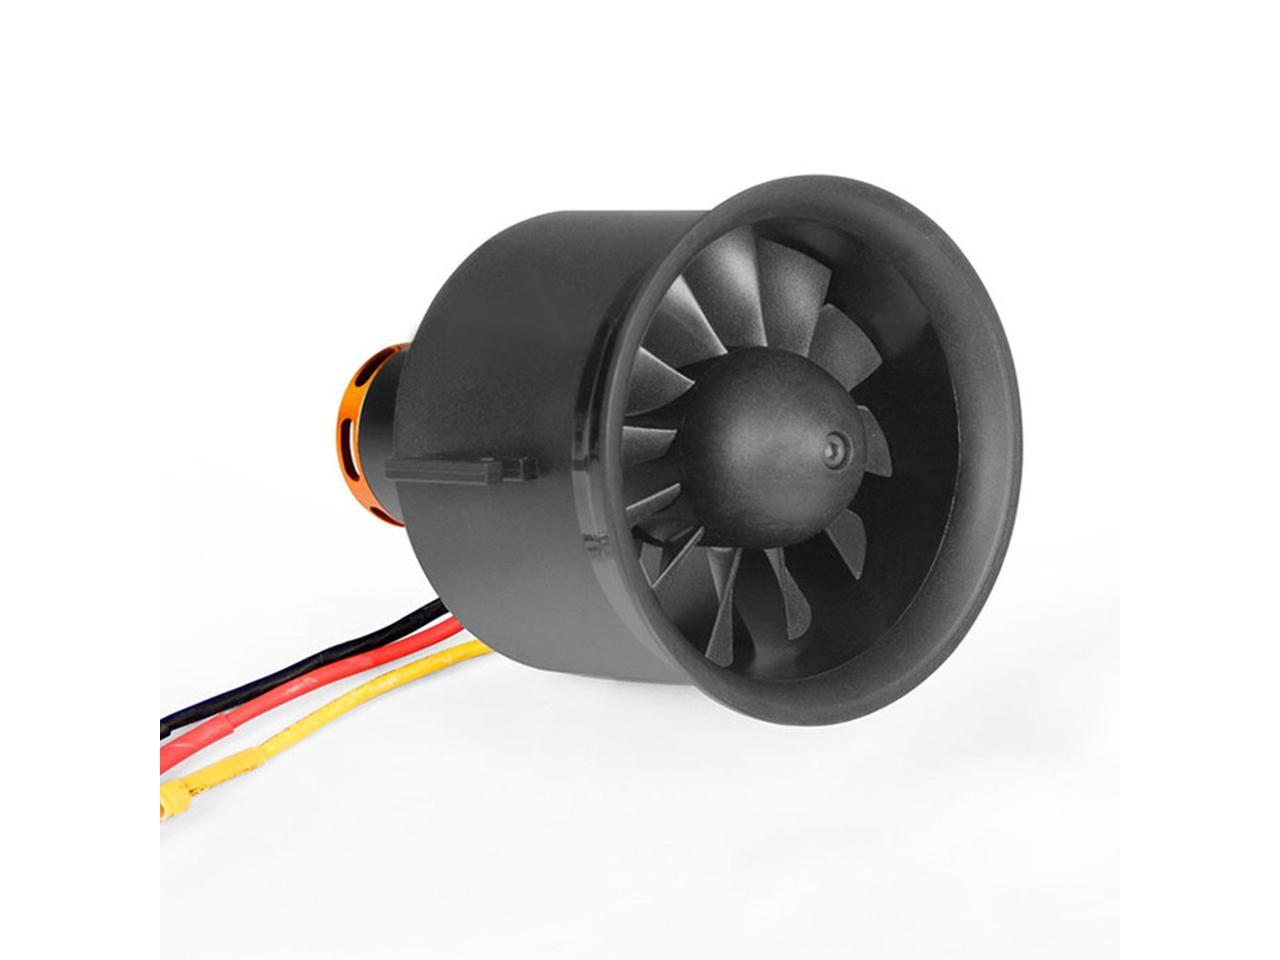 Freewing 70mm Edf Ducted Fan 12 Blades 4s E7215 With 2850kv Motor For